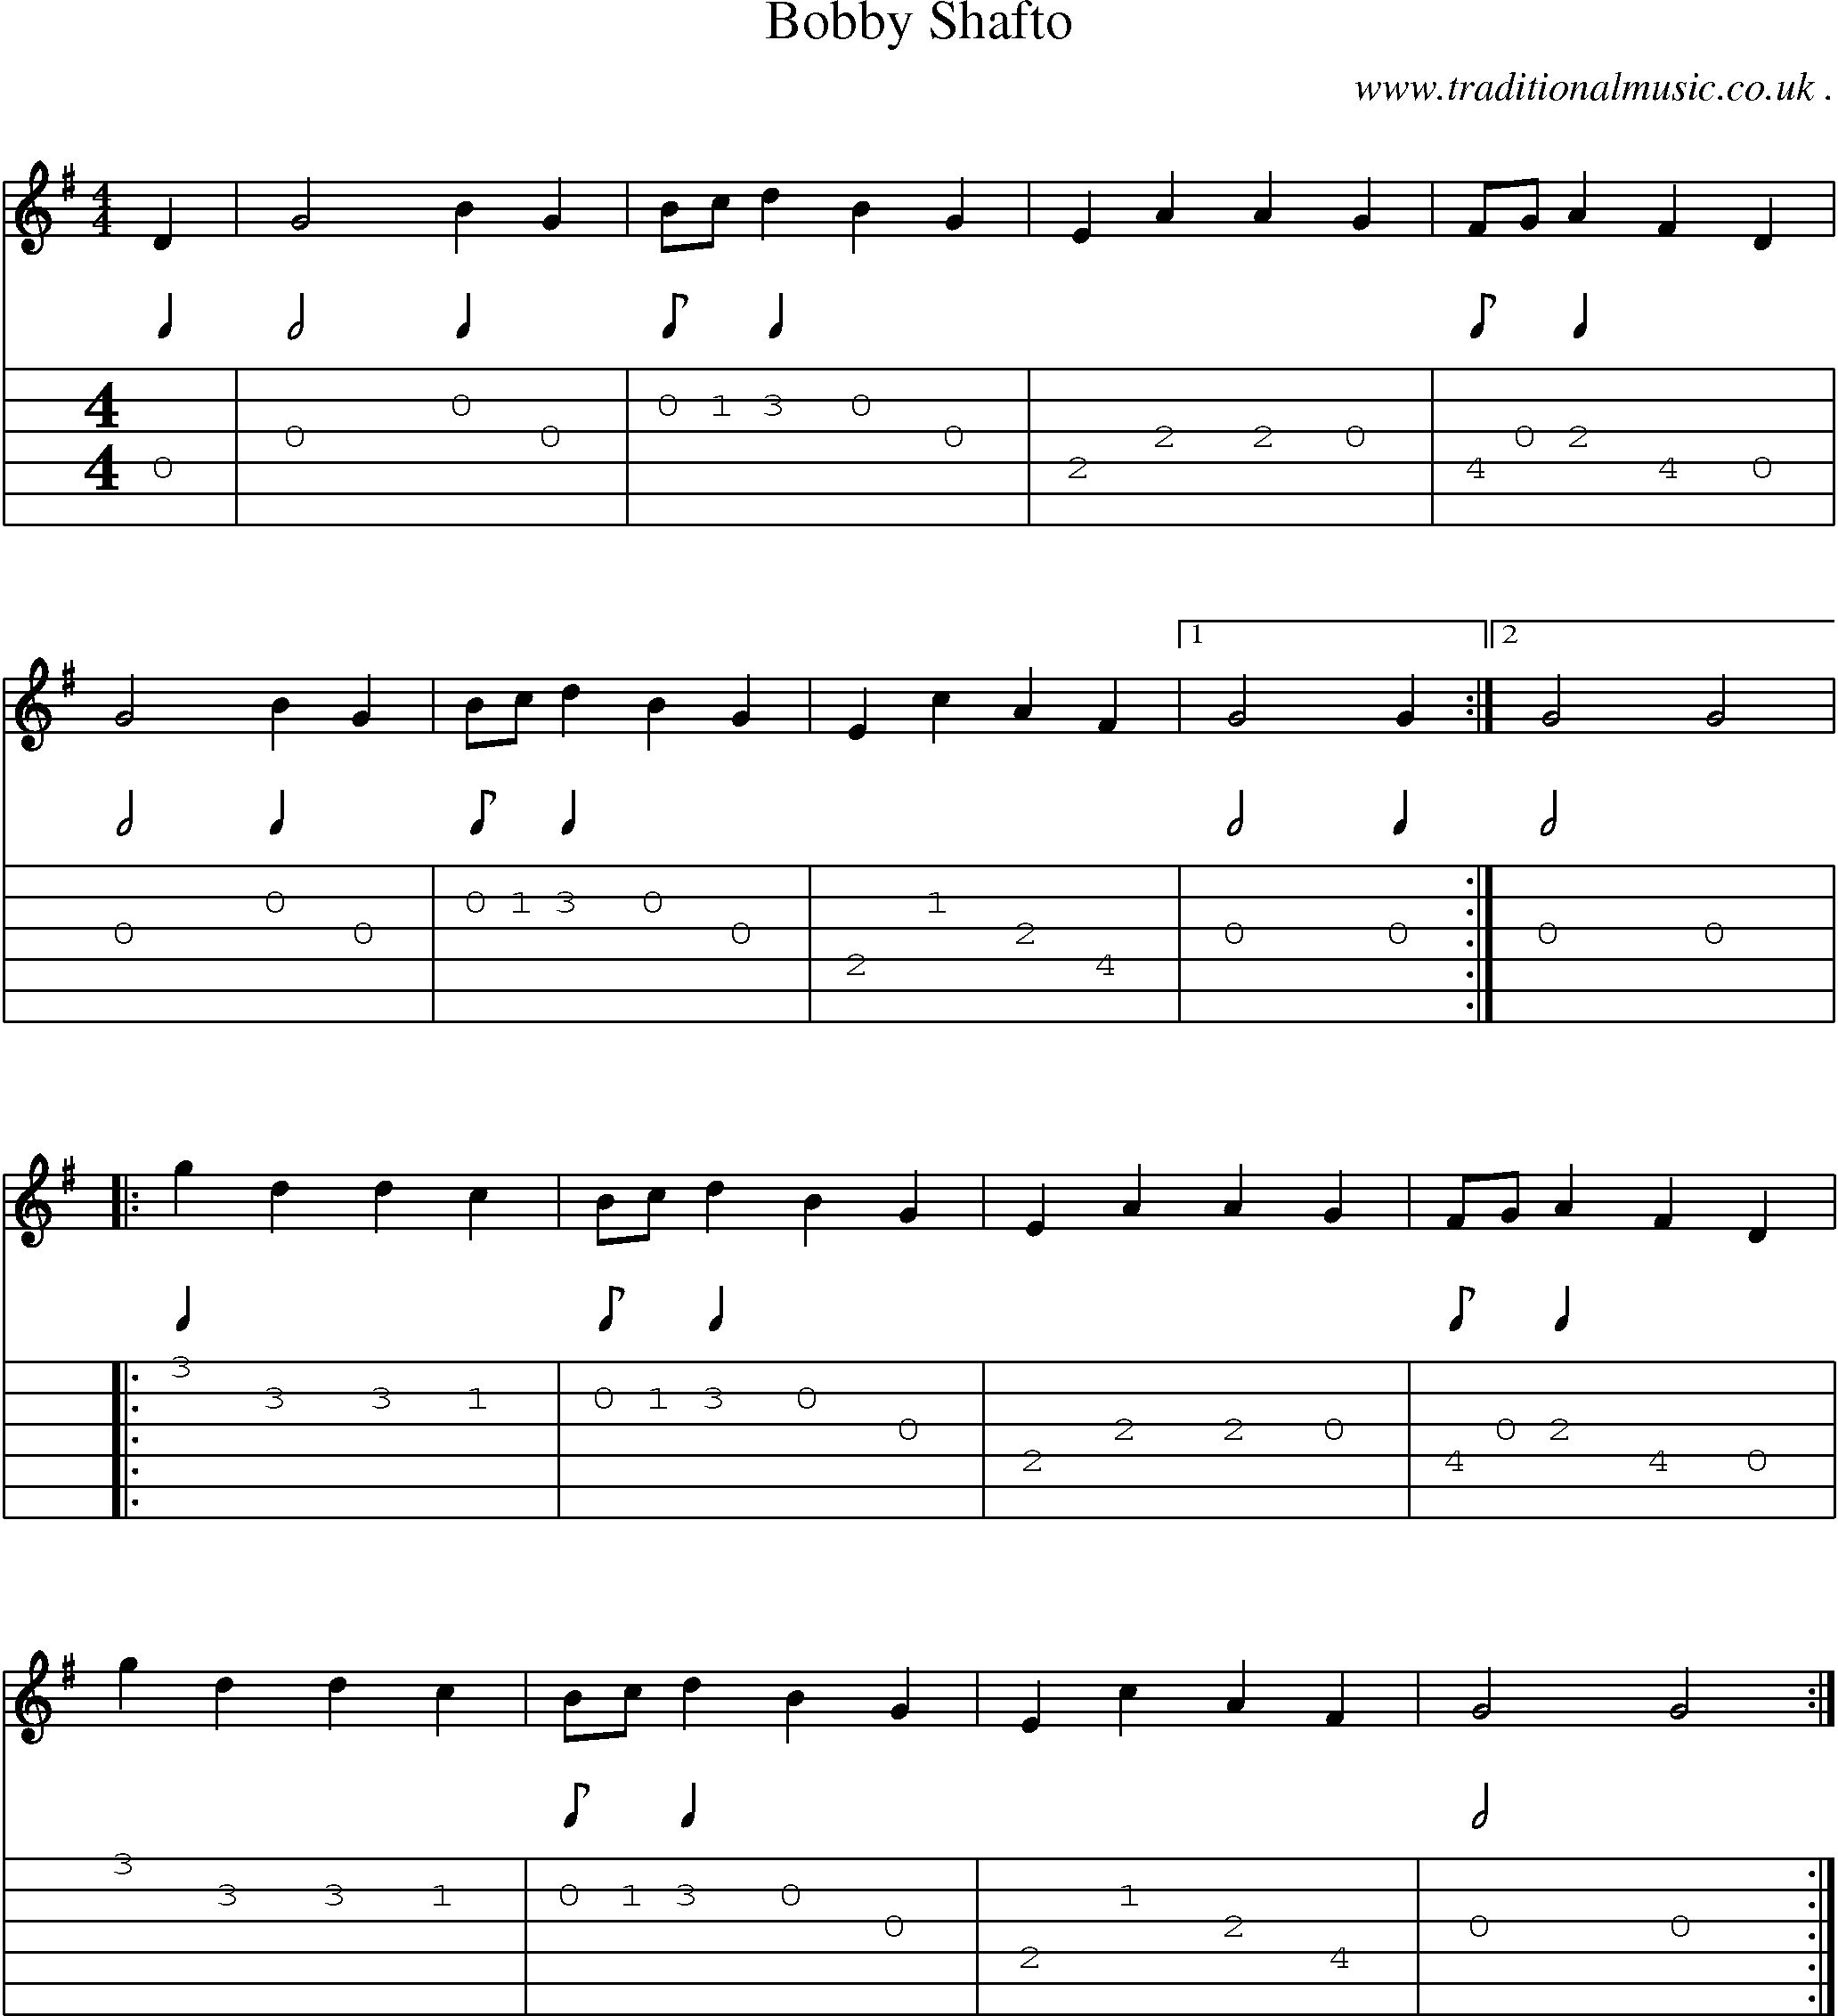 Sheet-Music and Guitar Tabs for Bobby Shafto